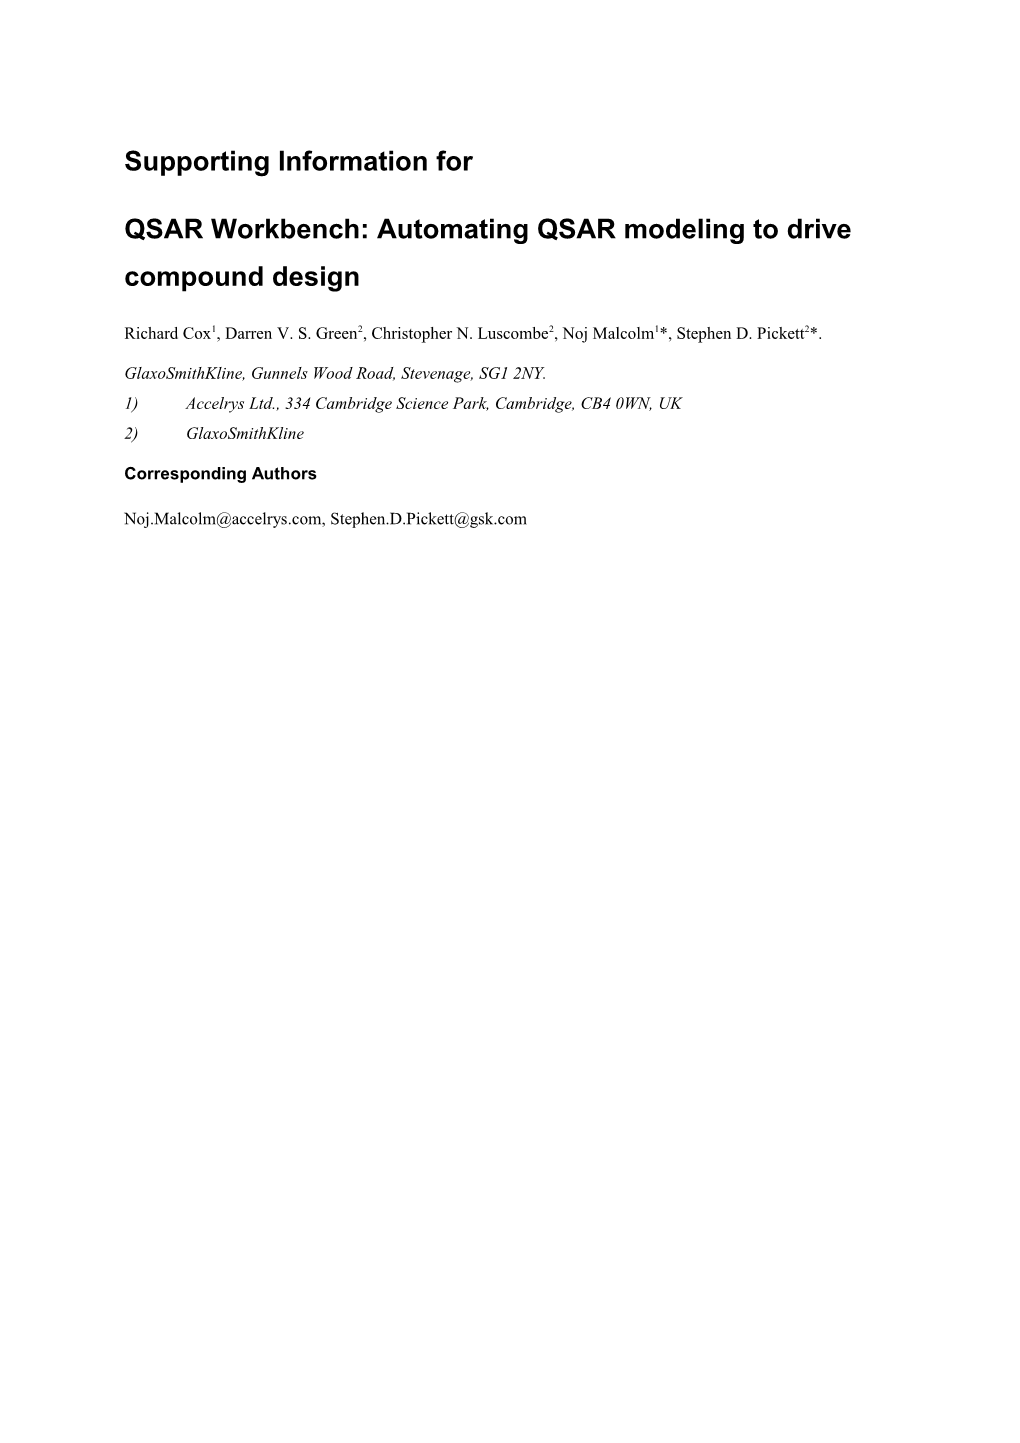 QSAR Workbench: Automating QSAR Modeling to Drive Compound Design